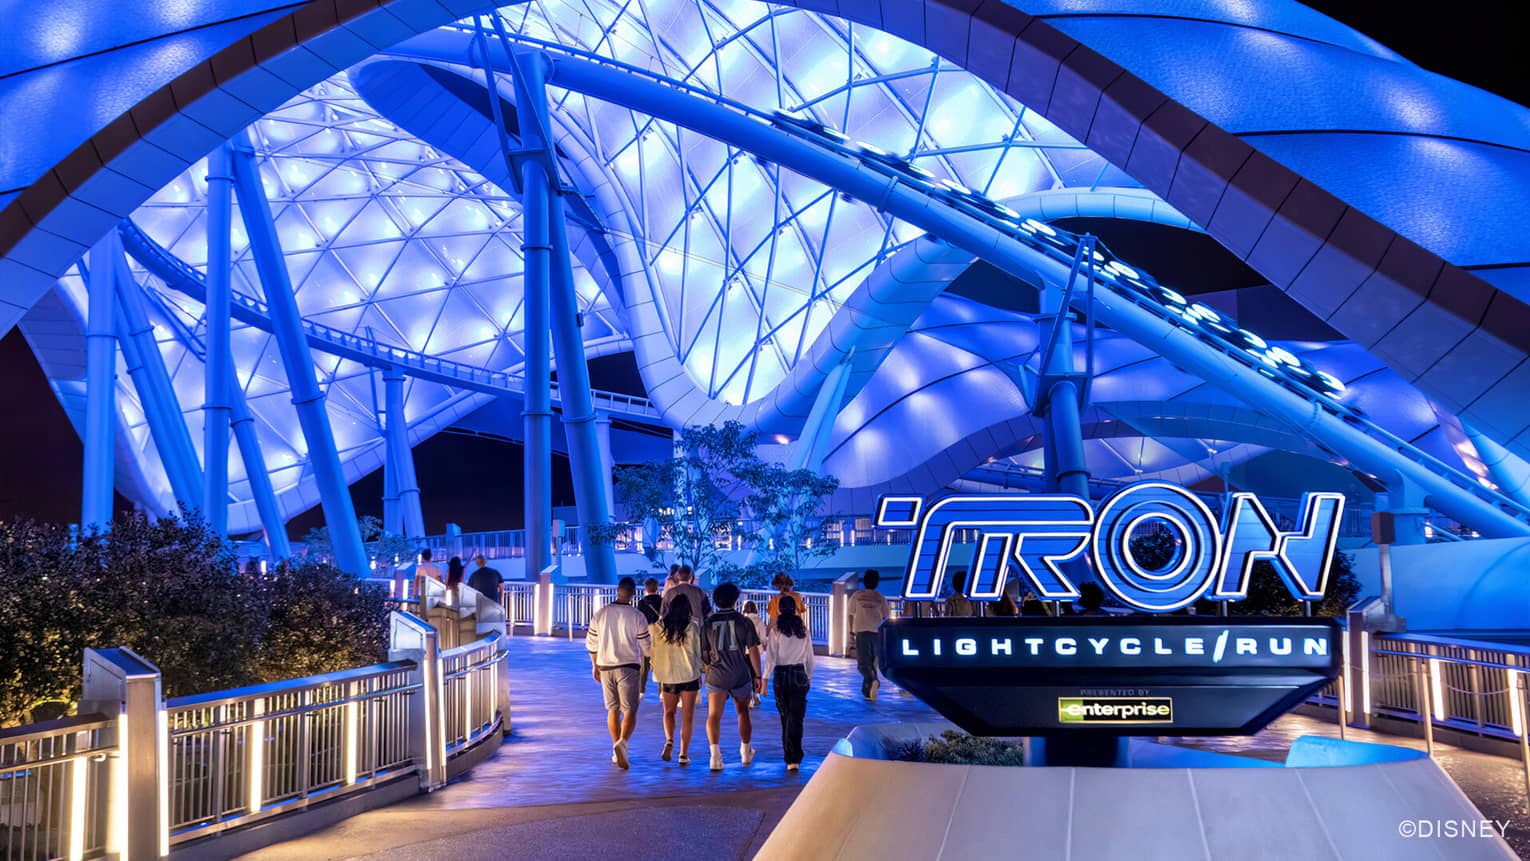 People walking under a glowing blue structure with a sign that says "TRON LIGHTCYCLE/RUN" under it.